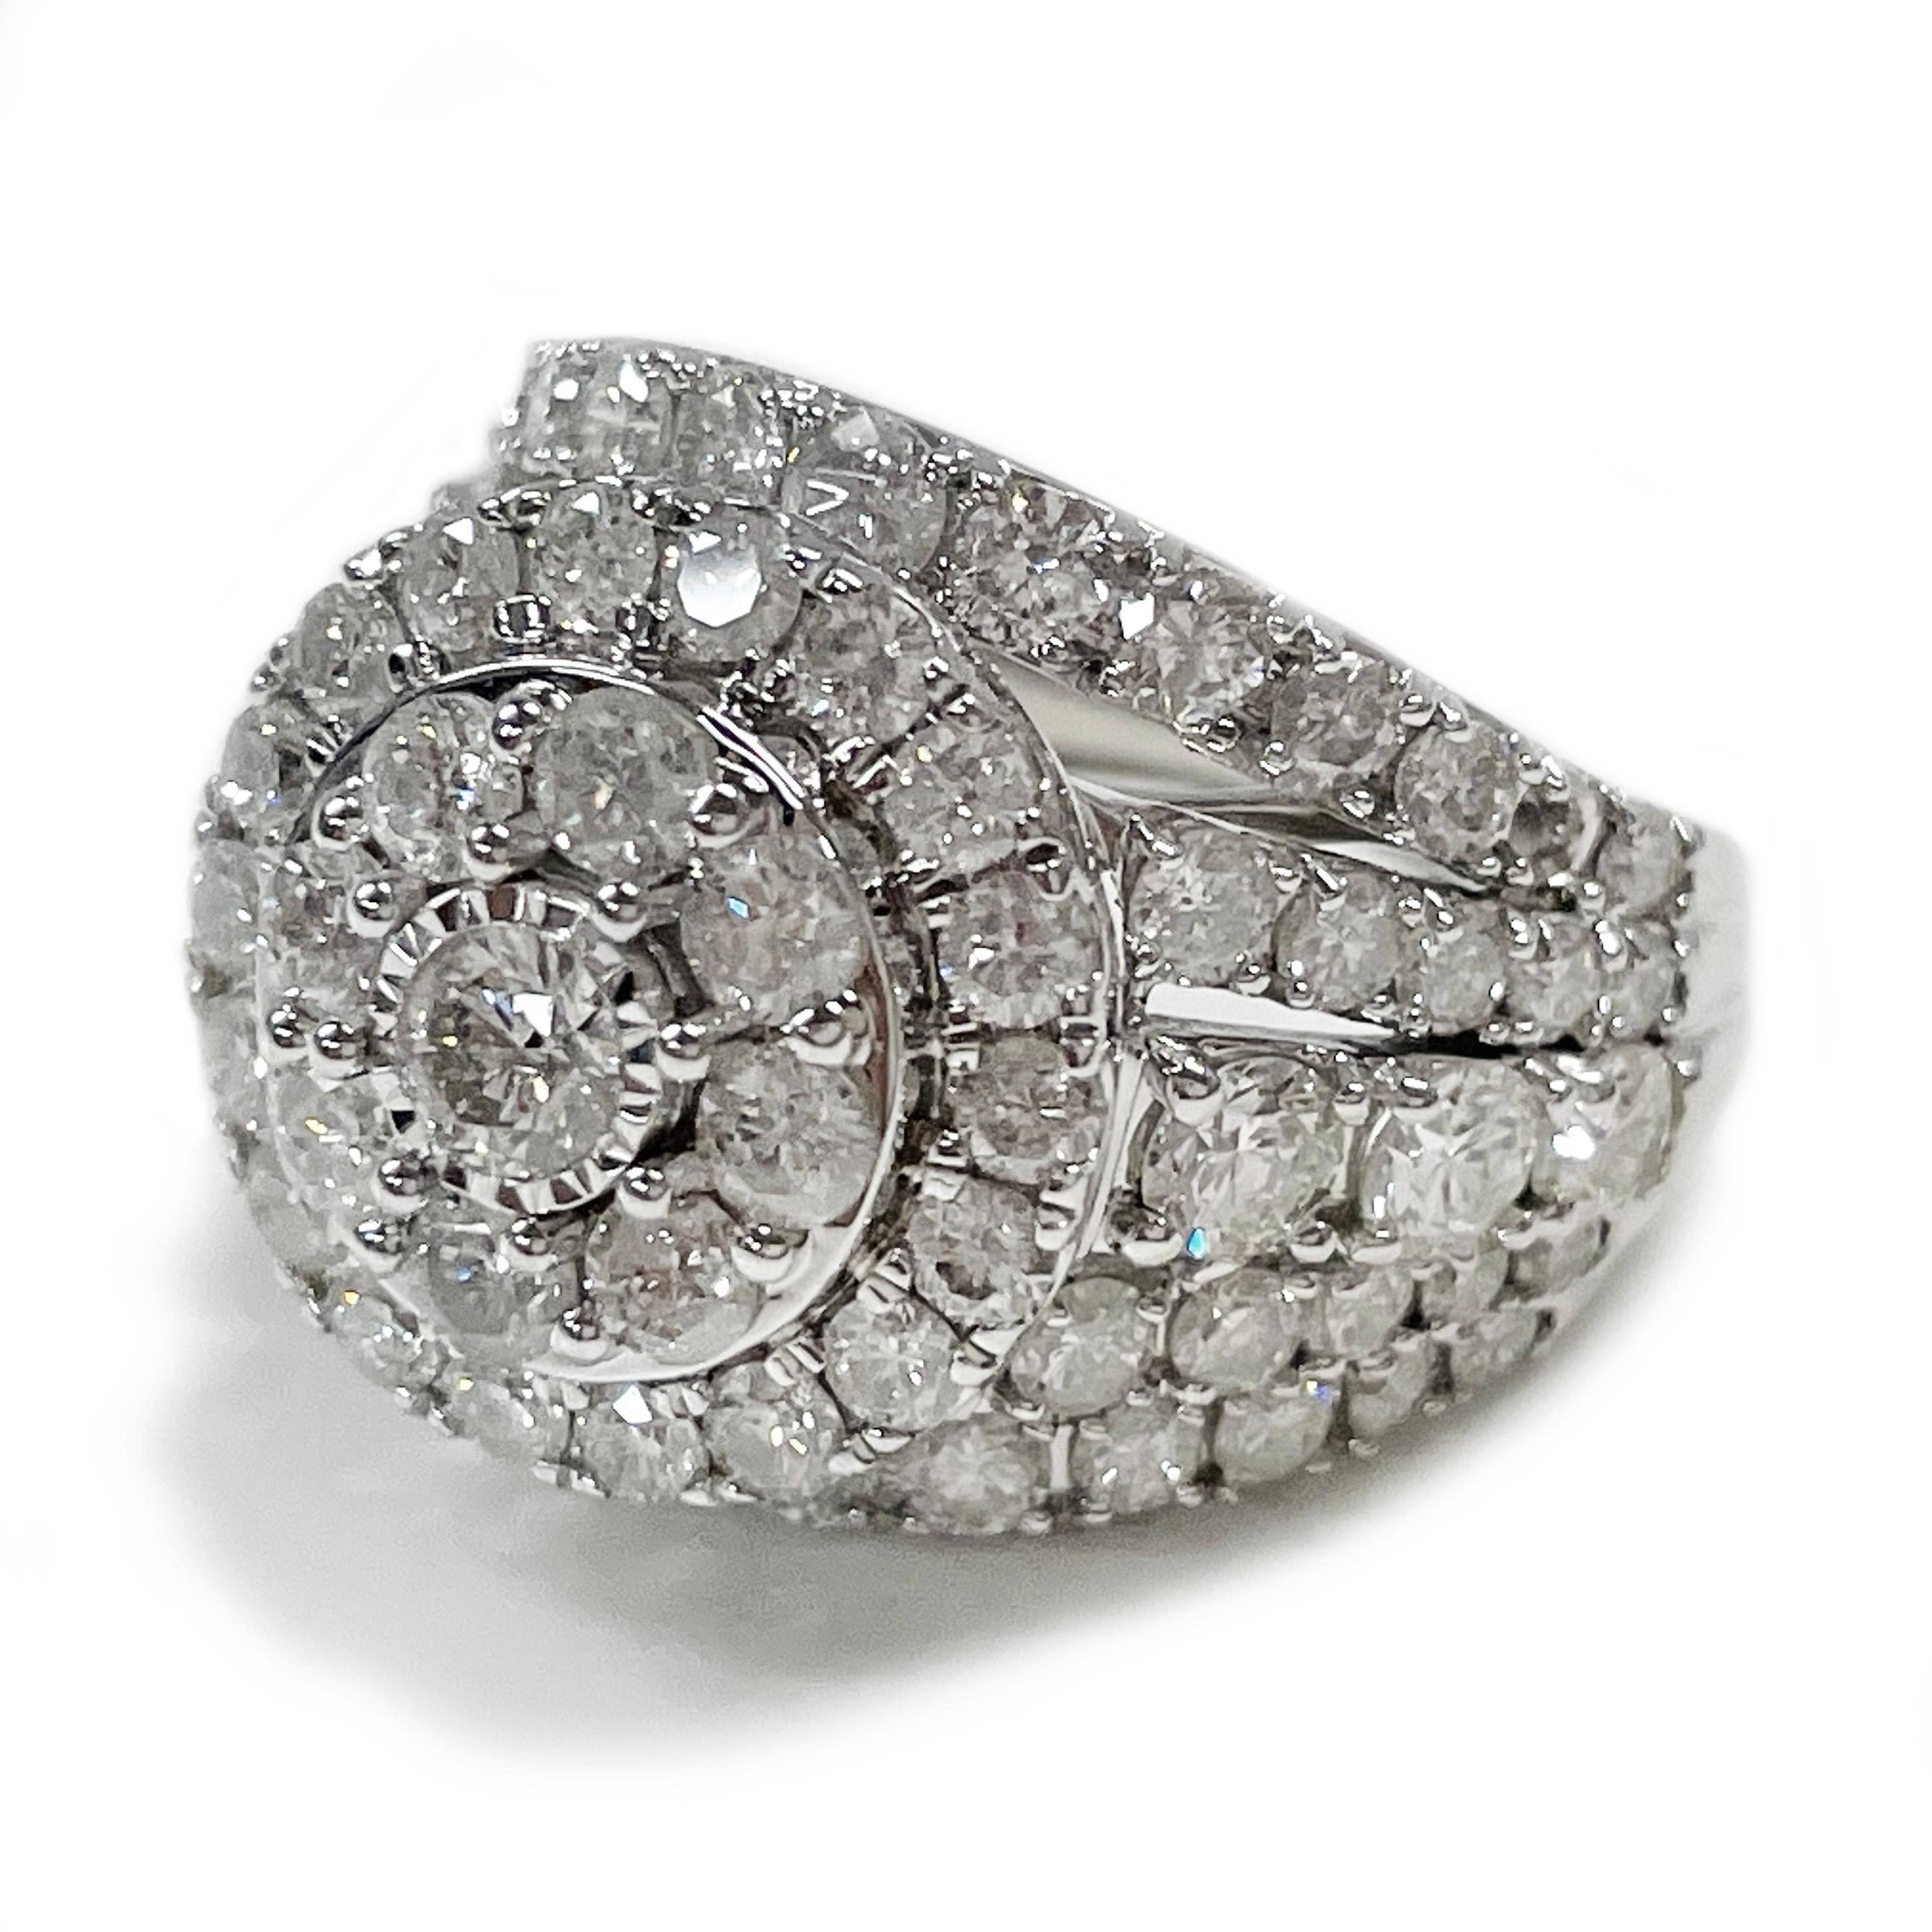 14 Karat White Gold Cluster Diamond Ring. Seventy-one sparkling round prong-set diamonds. The design consists of a center diamond with two circles of diamonds and a split band of five rows of diamonds set on half of the band. The diamonds measure